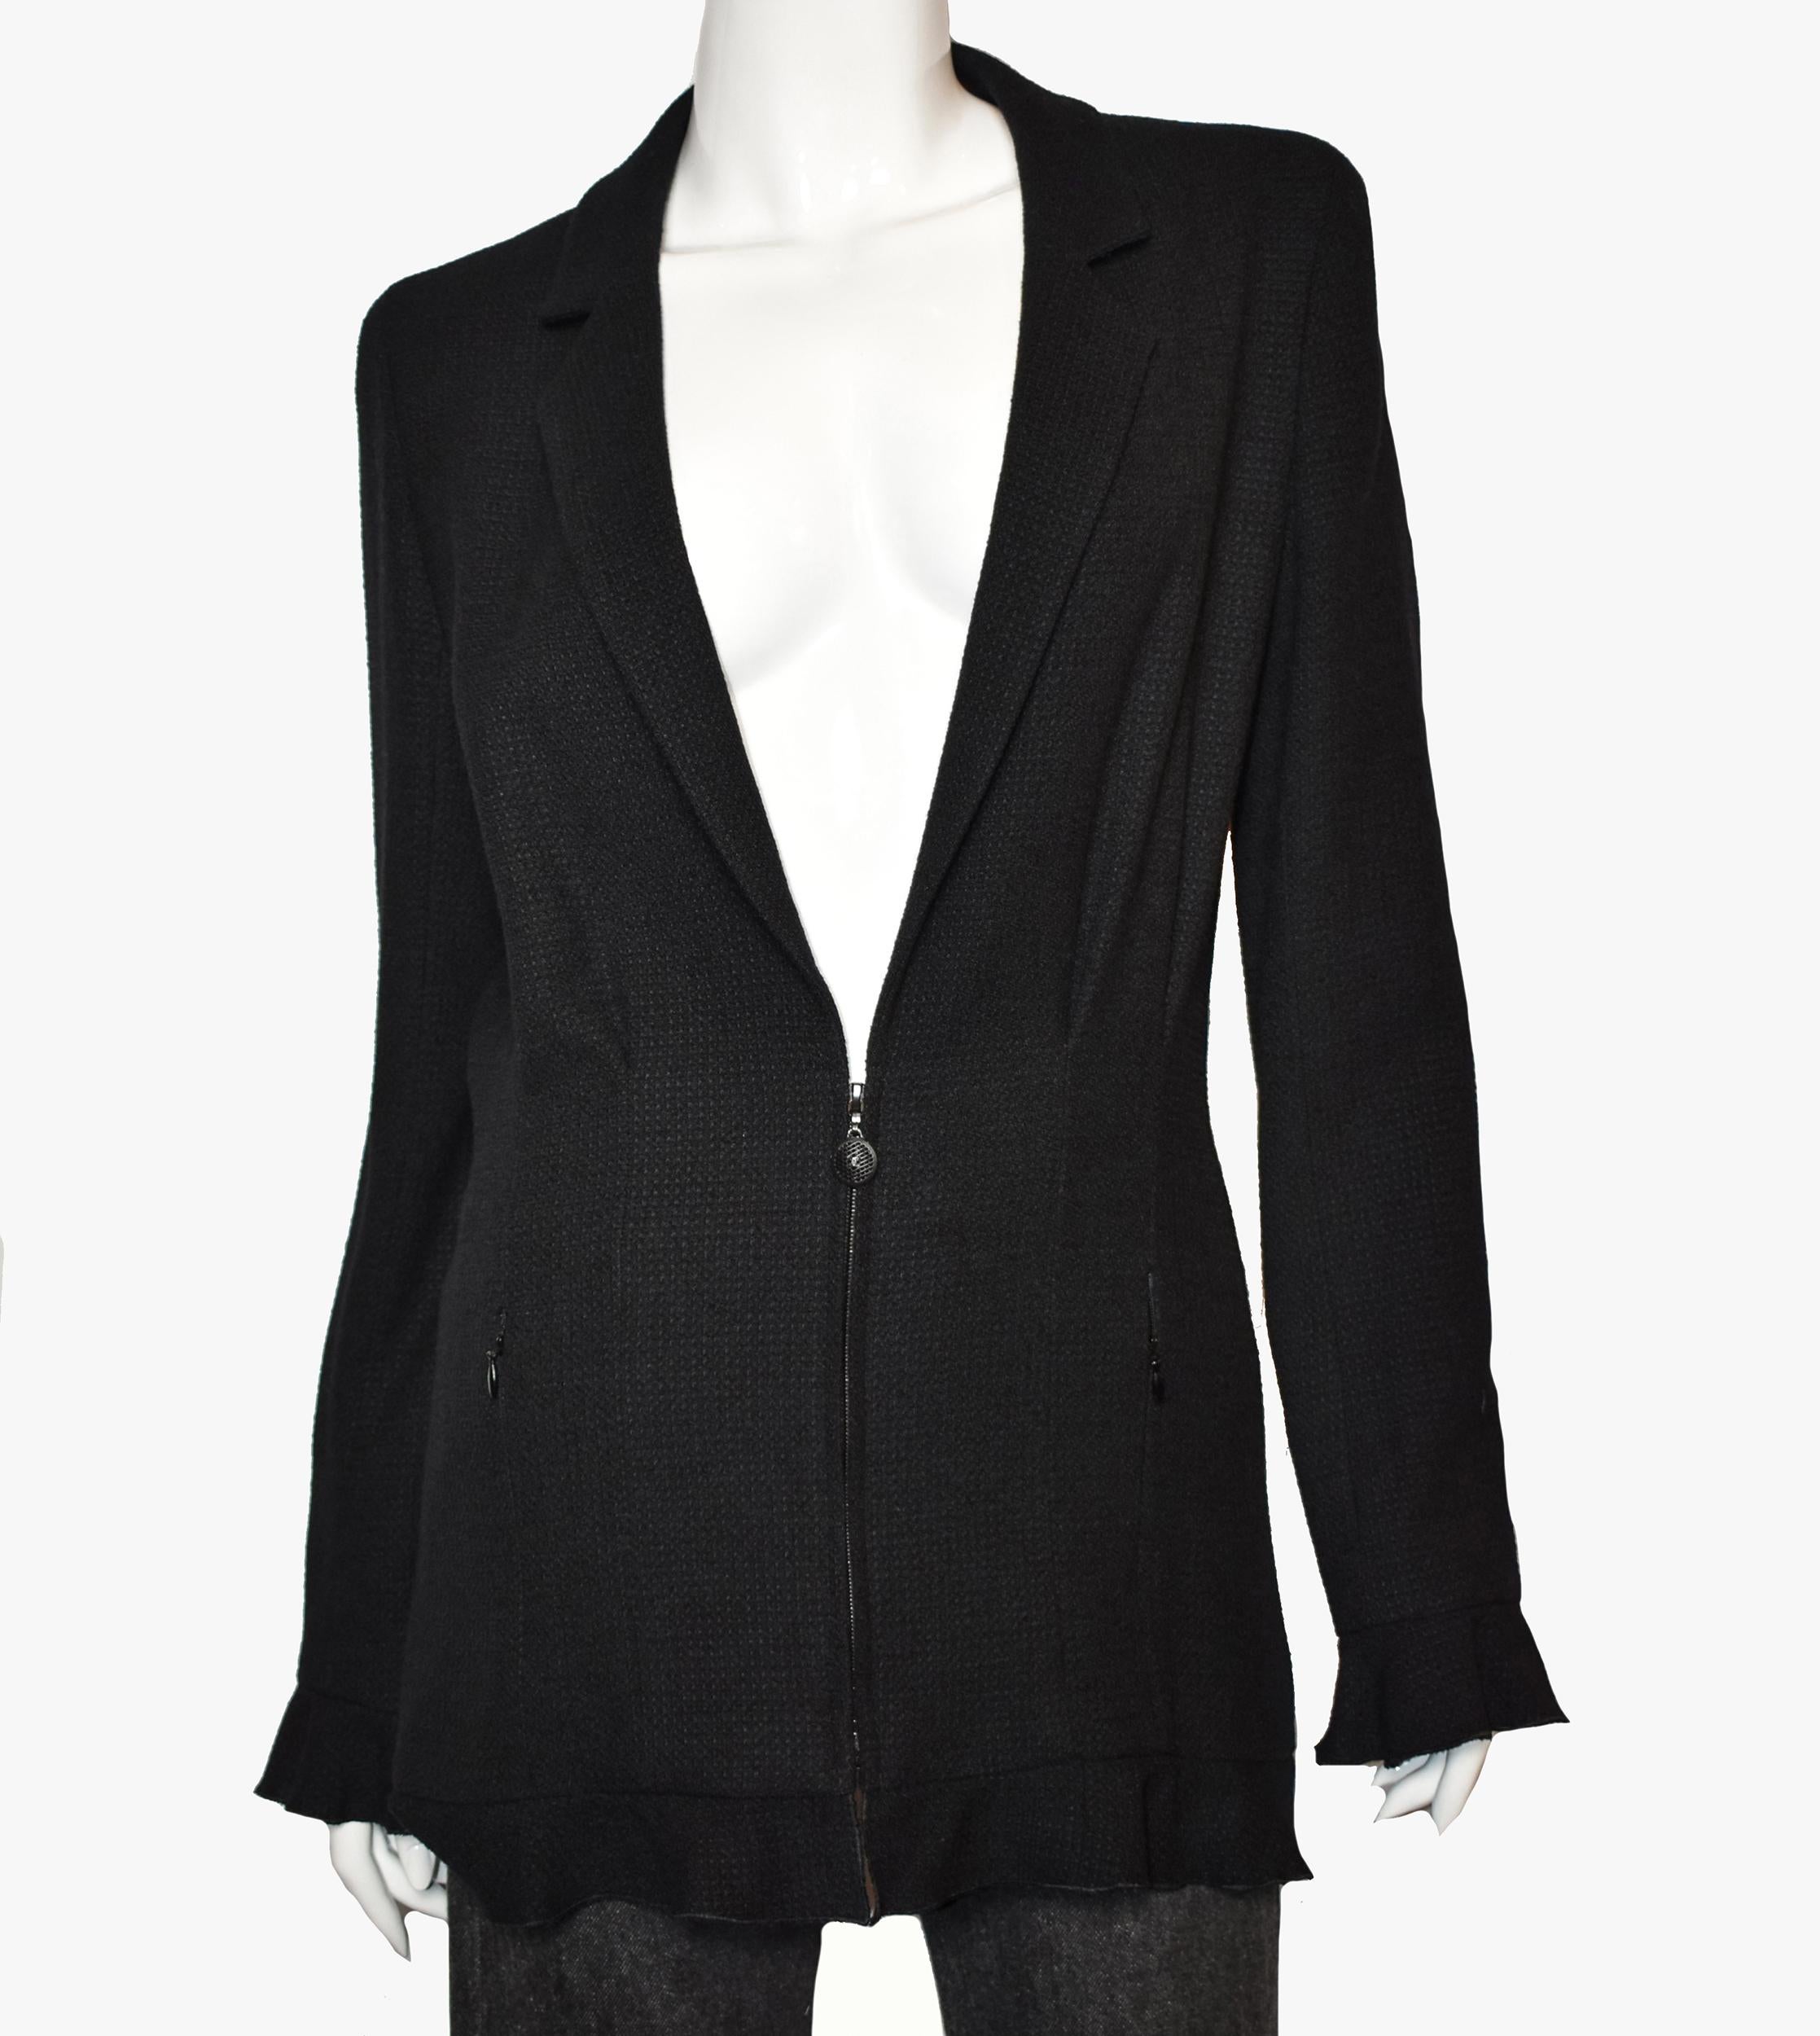 Chanel Frill Blazer From the Spring 2002 Collection by Karl Lagerfeld. Black color, tweed pattern, pointed collar, zip pockets & zip closure

Fabric: 60% Wool, 40% Rayon;  Lining 95% Silk, 5% Lycra;  Combo 90% Silk, 10% Elastane
Size: M / US6,